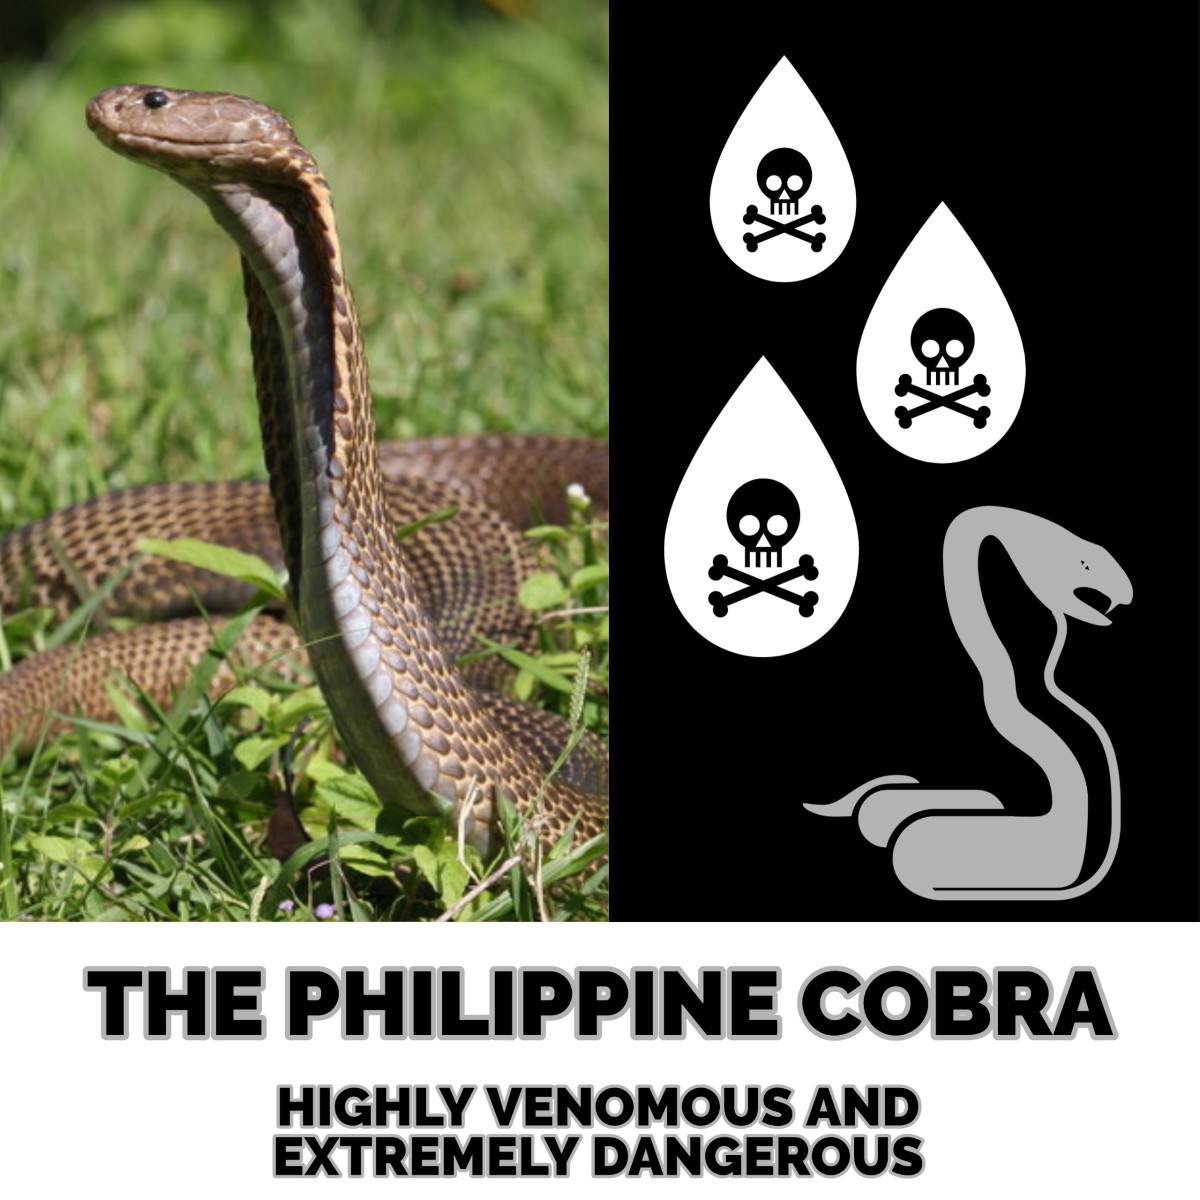 The Philippine Cobra: Highly venomous and extremely dangerous.